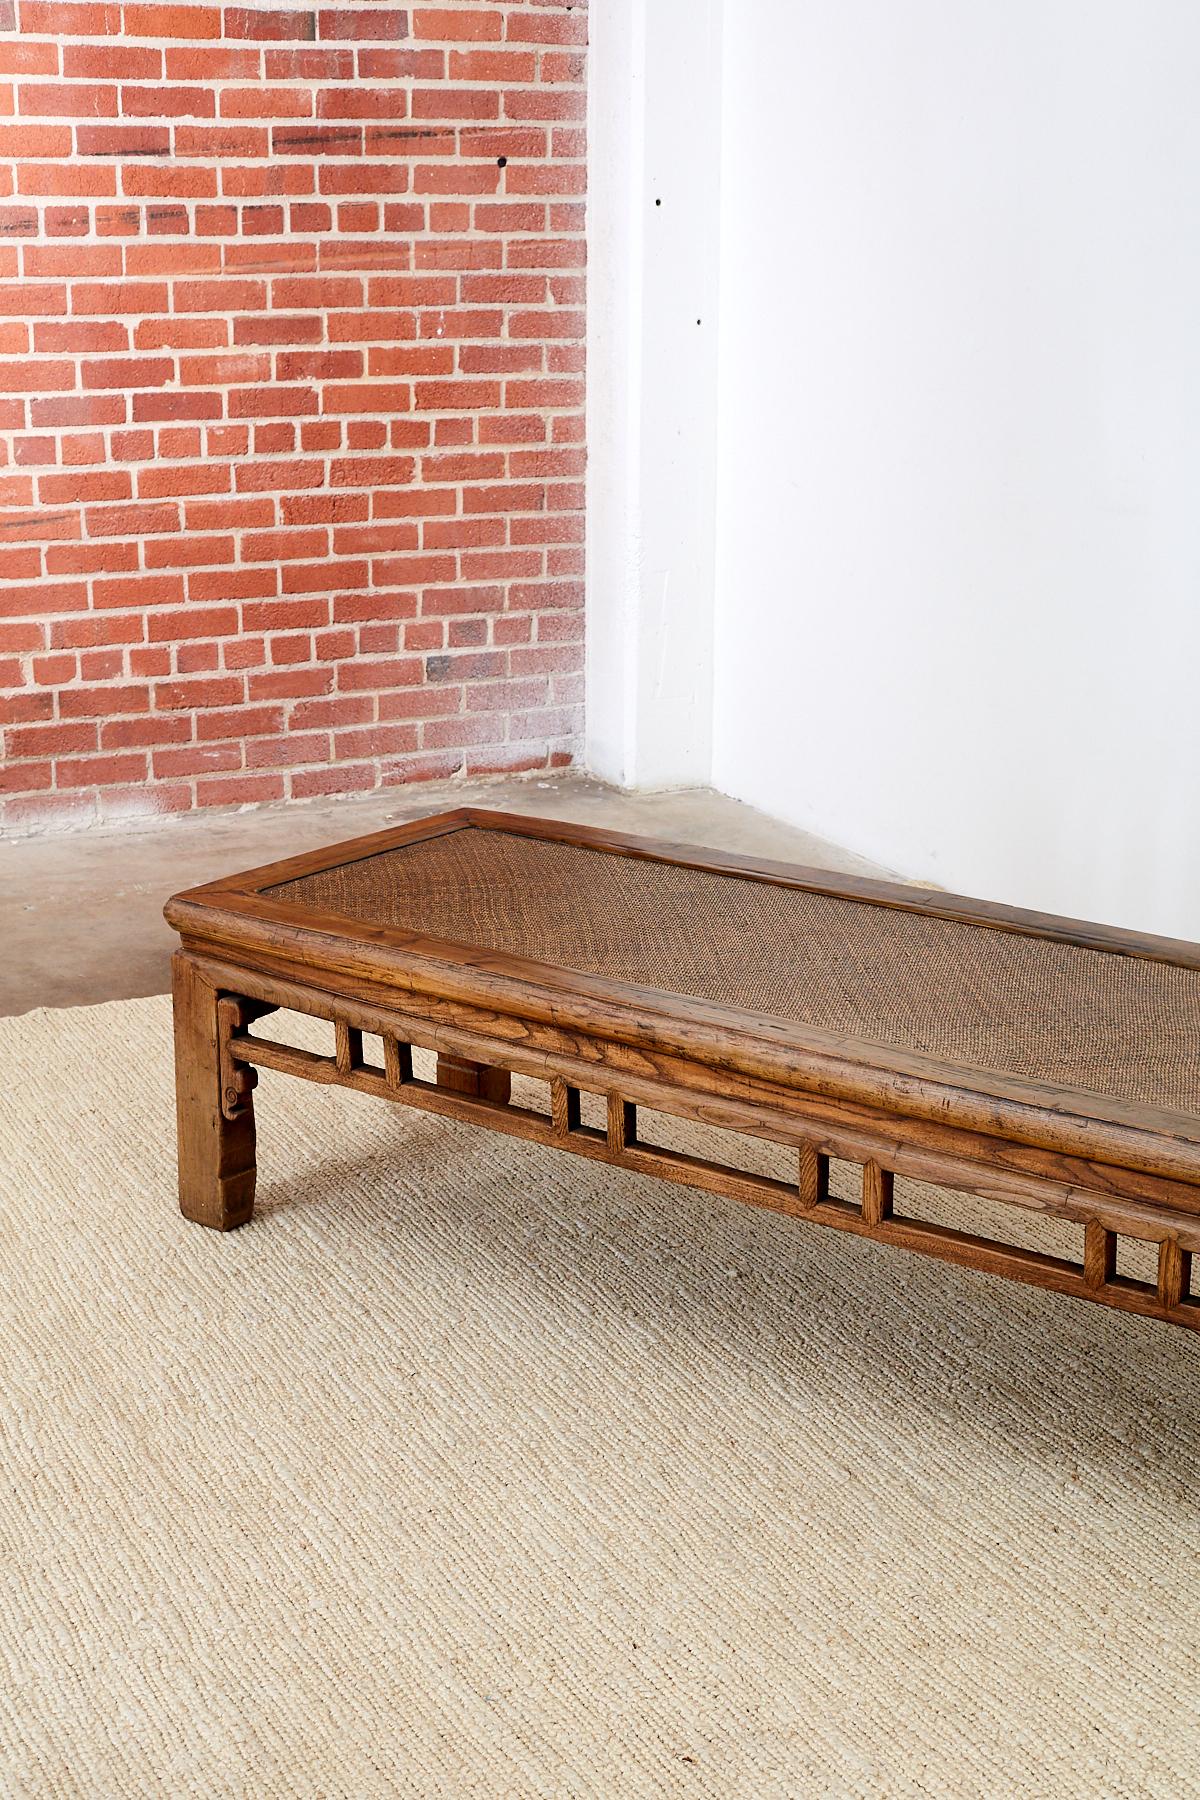 Chinese Hardwood Bench Coffee Table with Raffia Seat 11